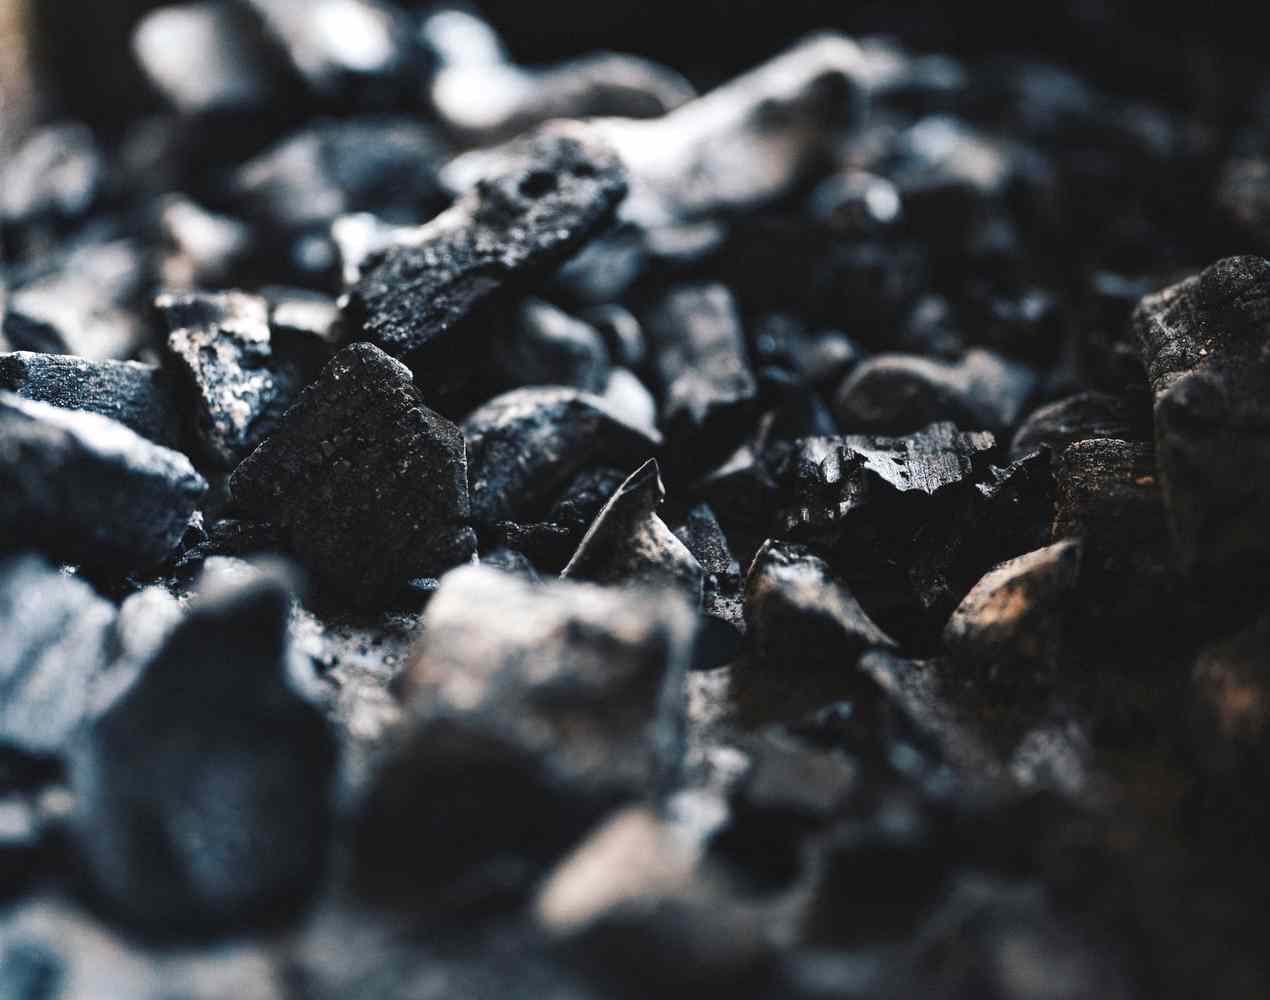 Govt plan to Relax Norms to Attract Global Coal Miners, coal demand,coal mine auctions